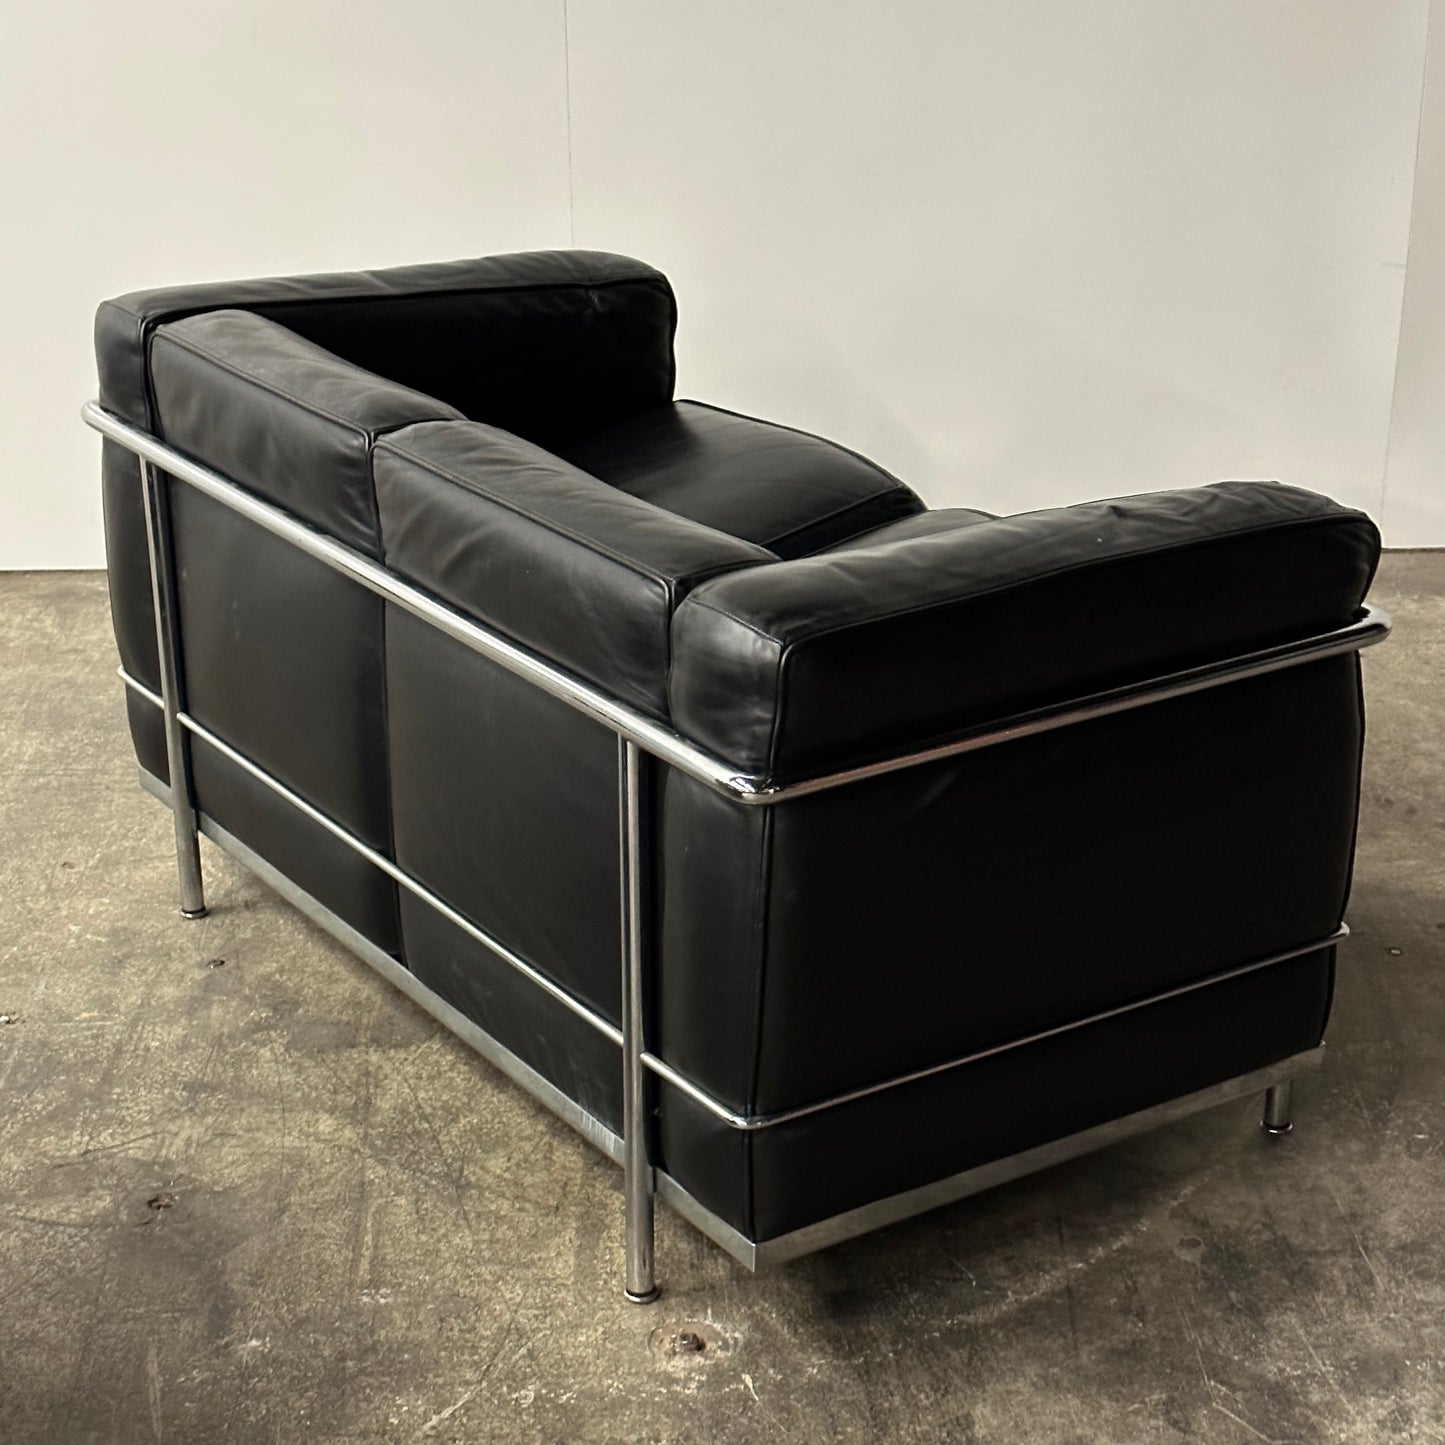 LC2 Petite Loveseat by Le Corbusier, Pierre Jeanneret, and Charlotte Perriand for Cassina